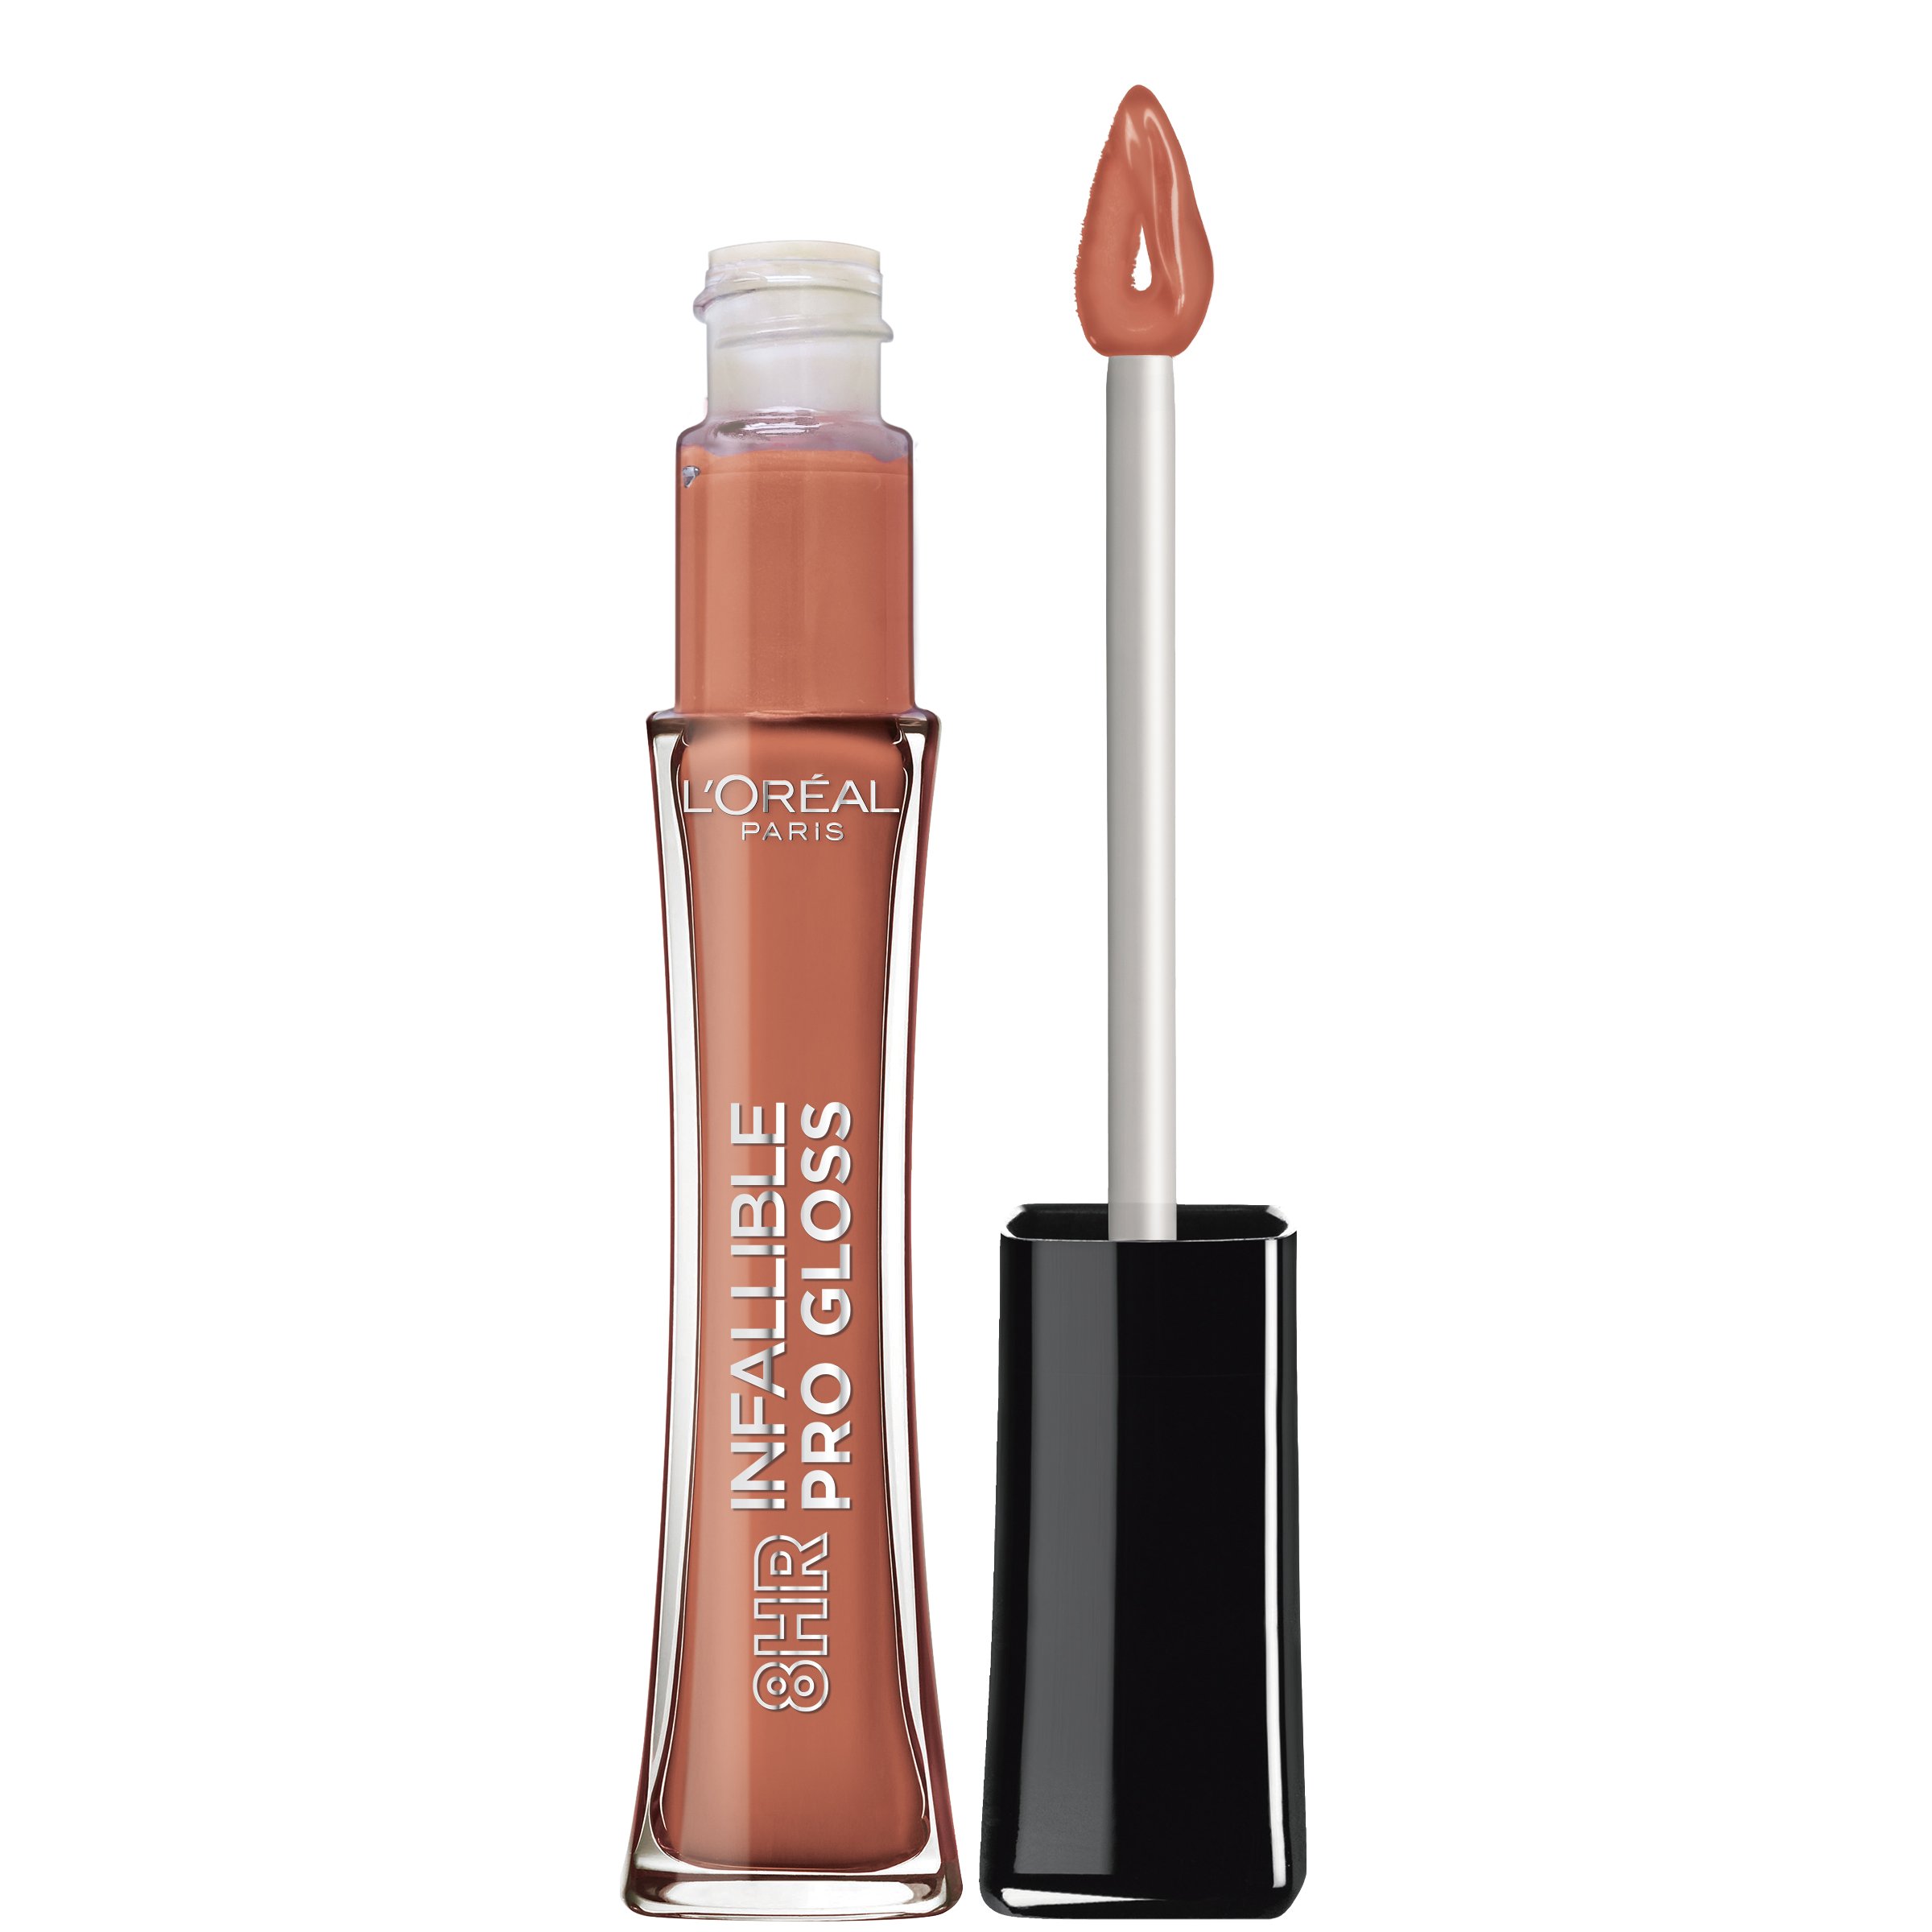 LOreal Paris Infallible 8 Hr Le Gloss, Barely Nude [815 